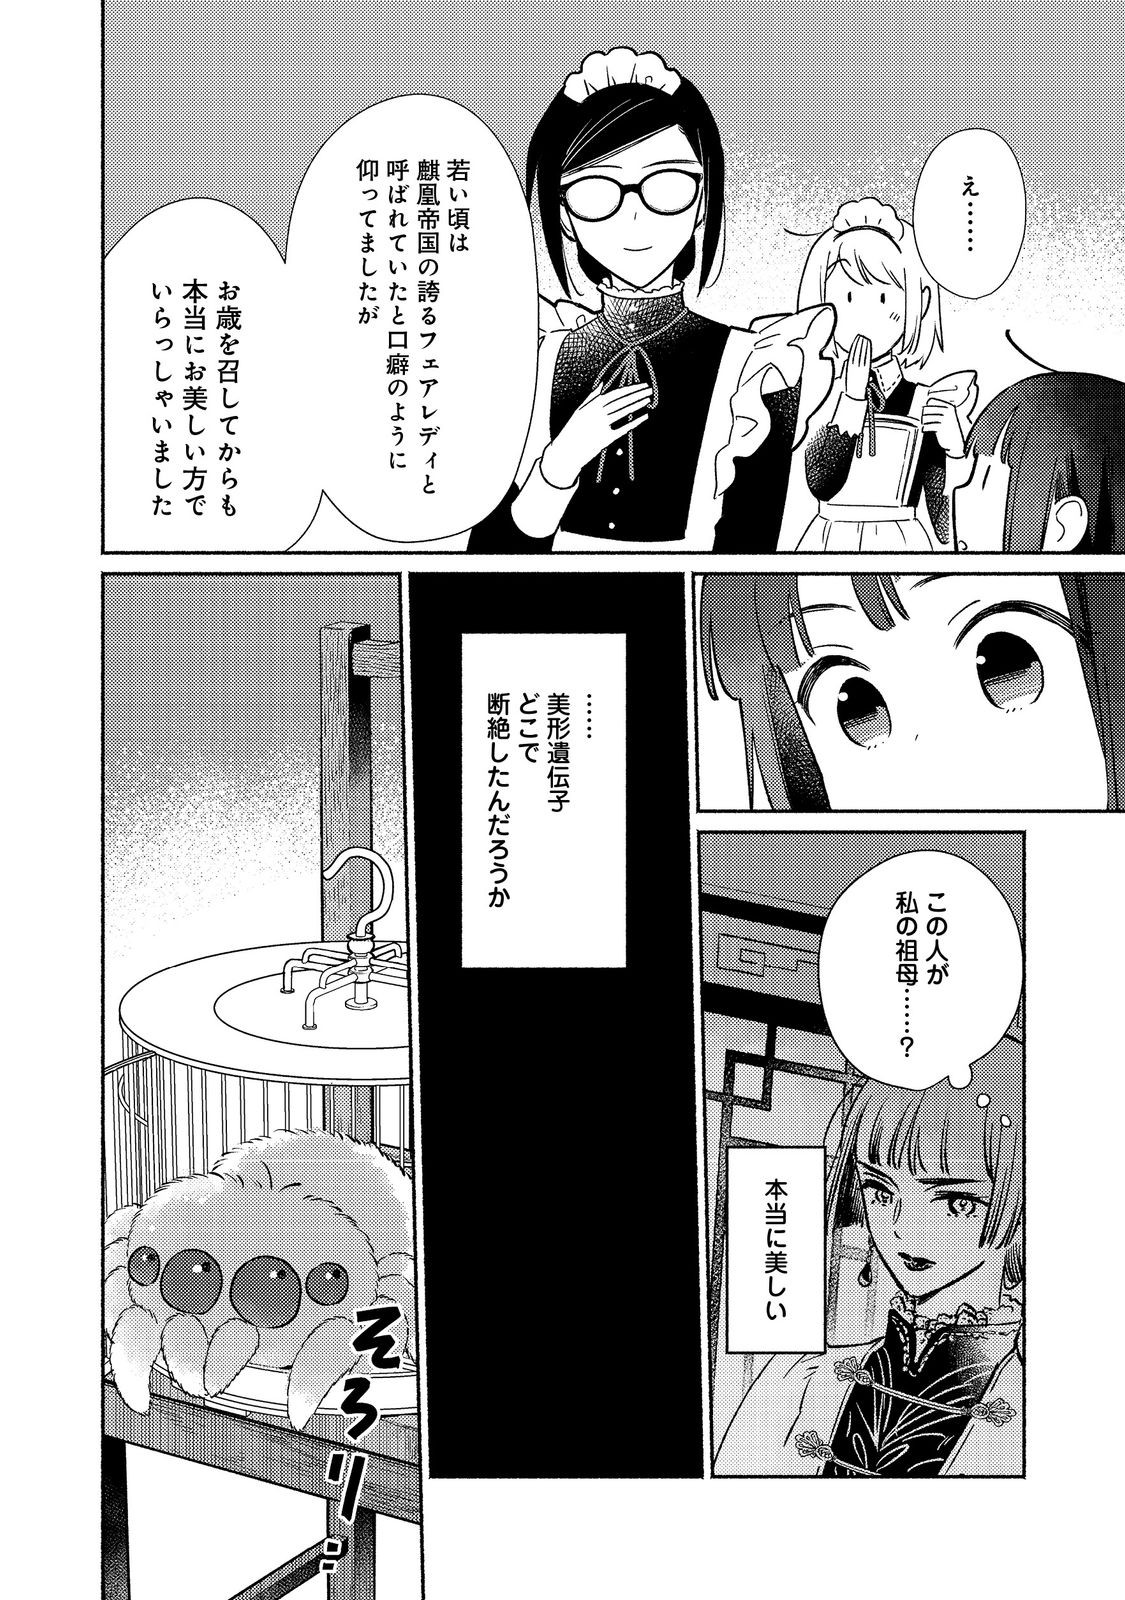 I’m the White Pig Nobleman 第27.1話 - Page 14